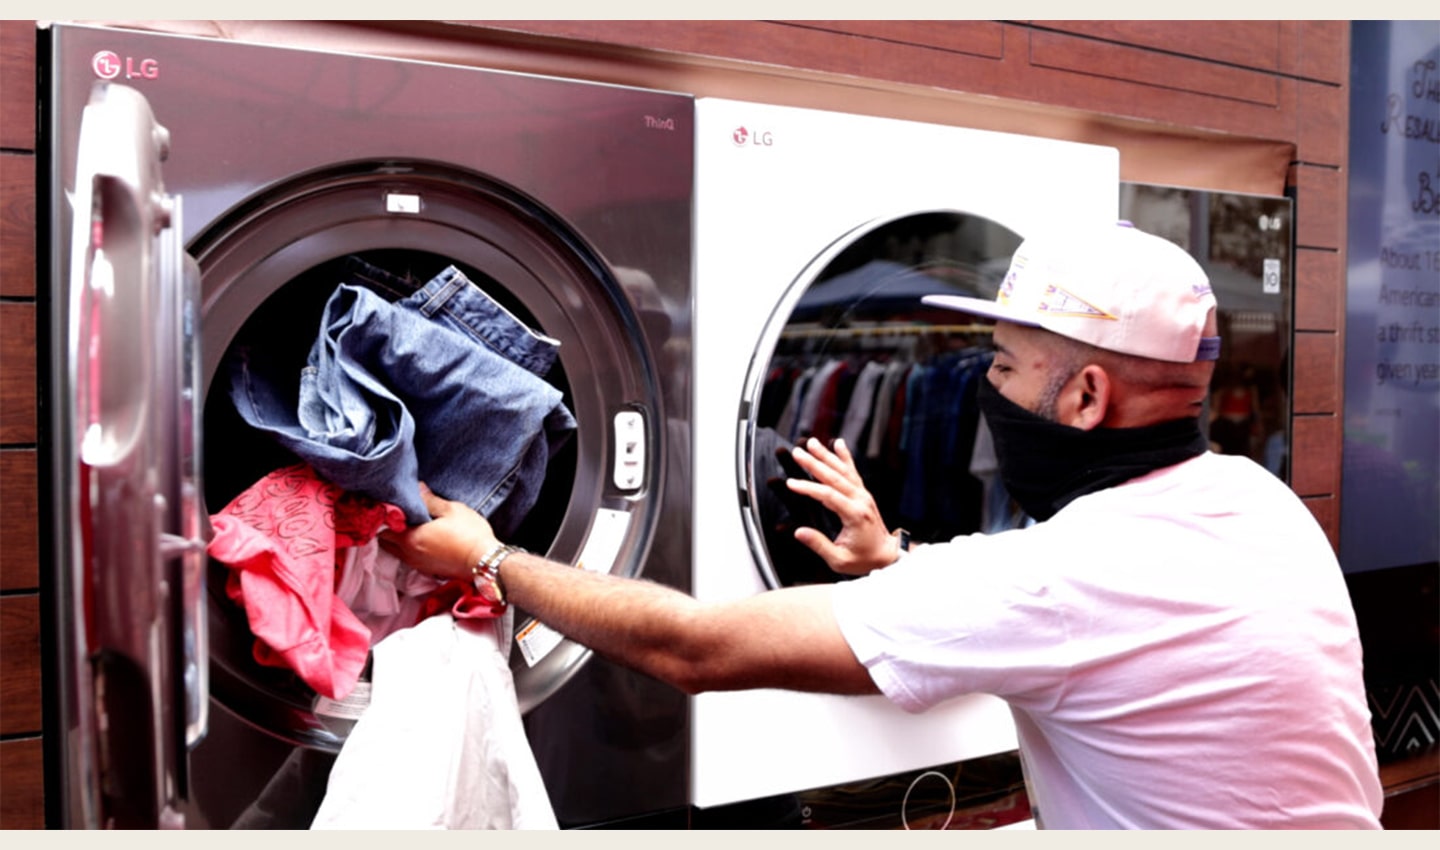 A man putting laundry into the LG washing machine so that they are fully sanitized and hygienic before being donated to local beneficiaries